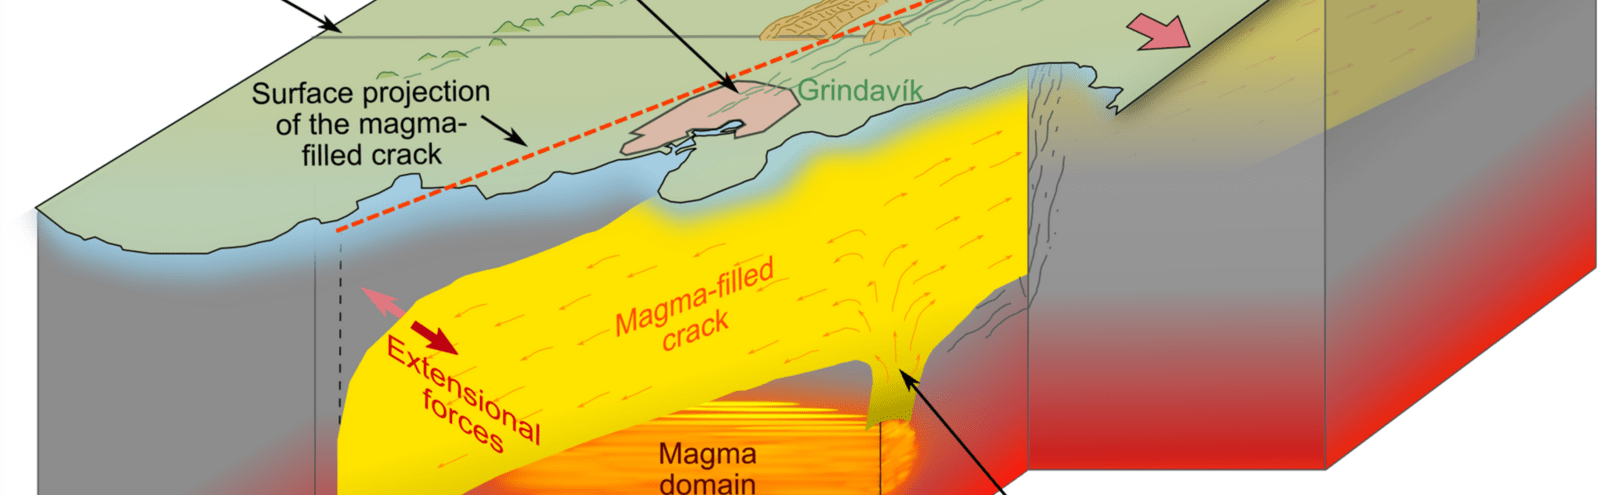 New understanding of ultra-rapid formation of magma filled cracks in the Earth - Available at University of Iceland